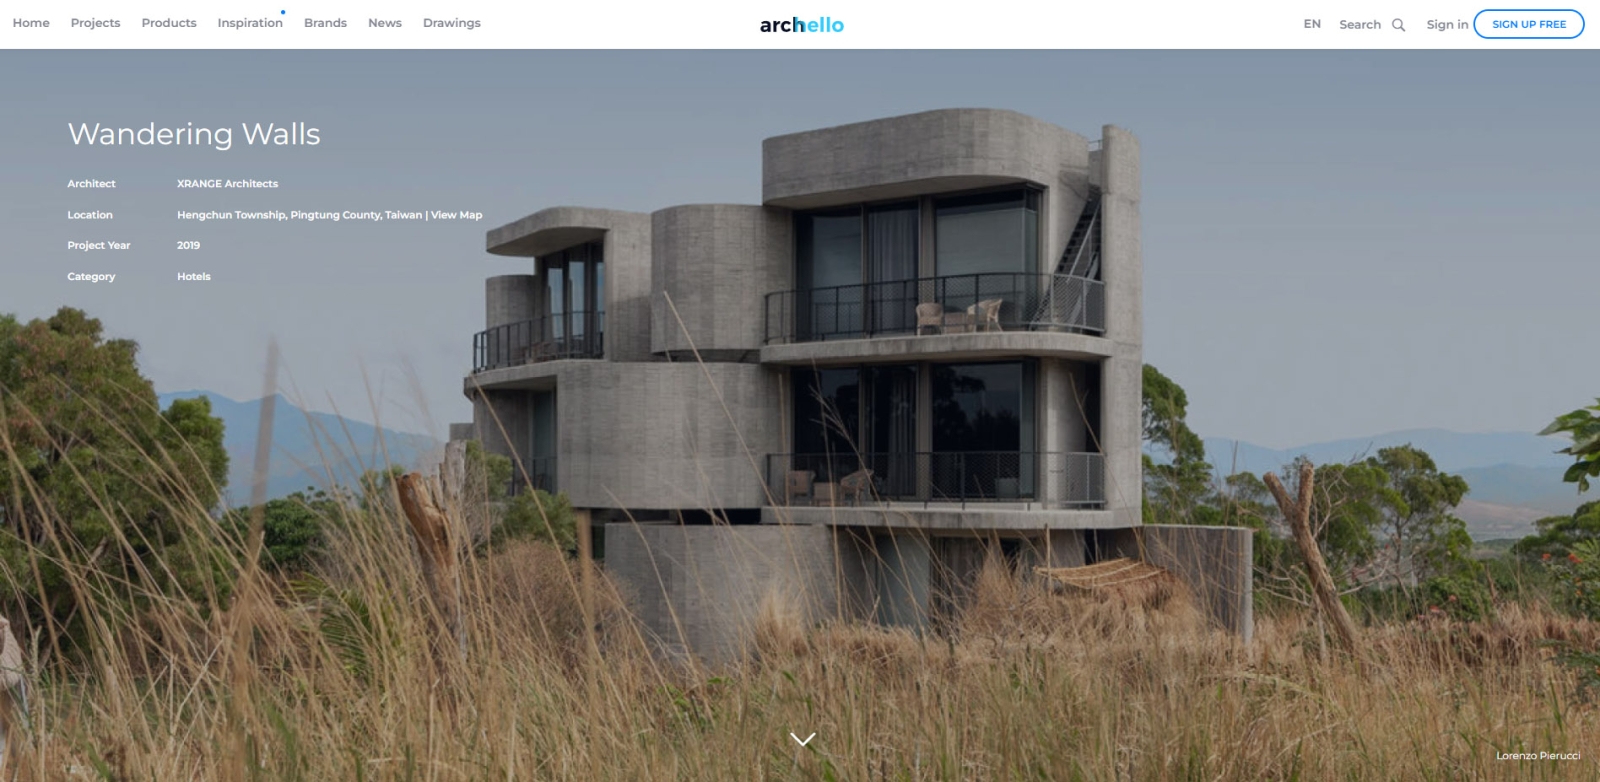 The Dutch website Archello reported the Wandering Walls